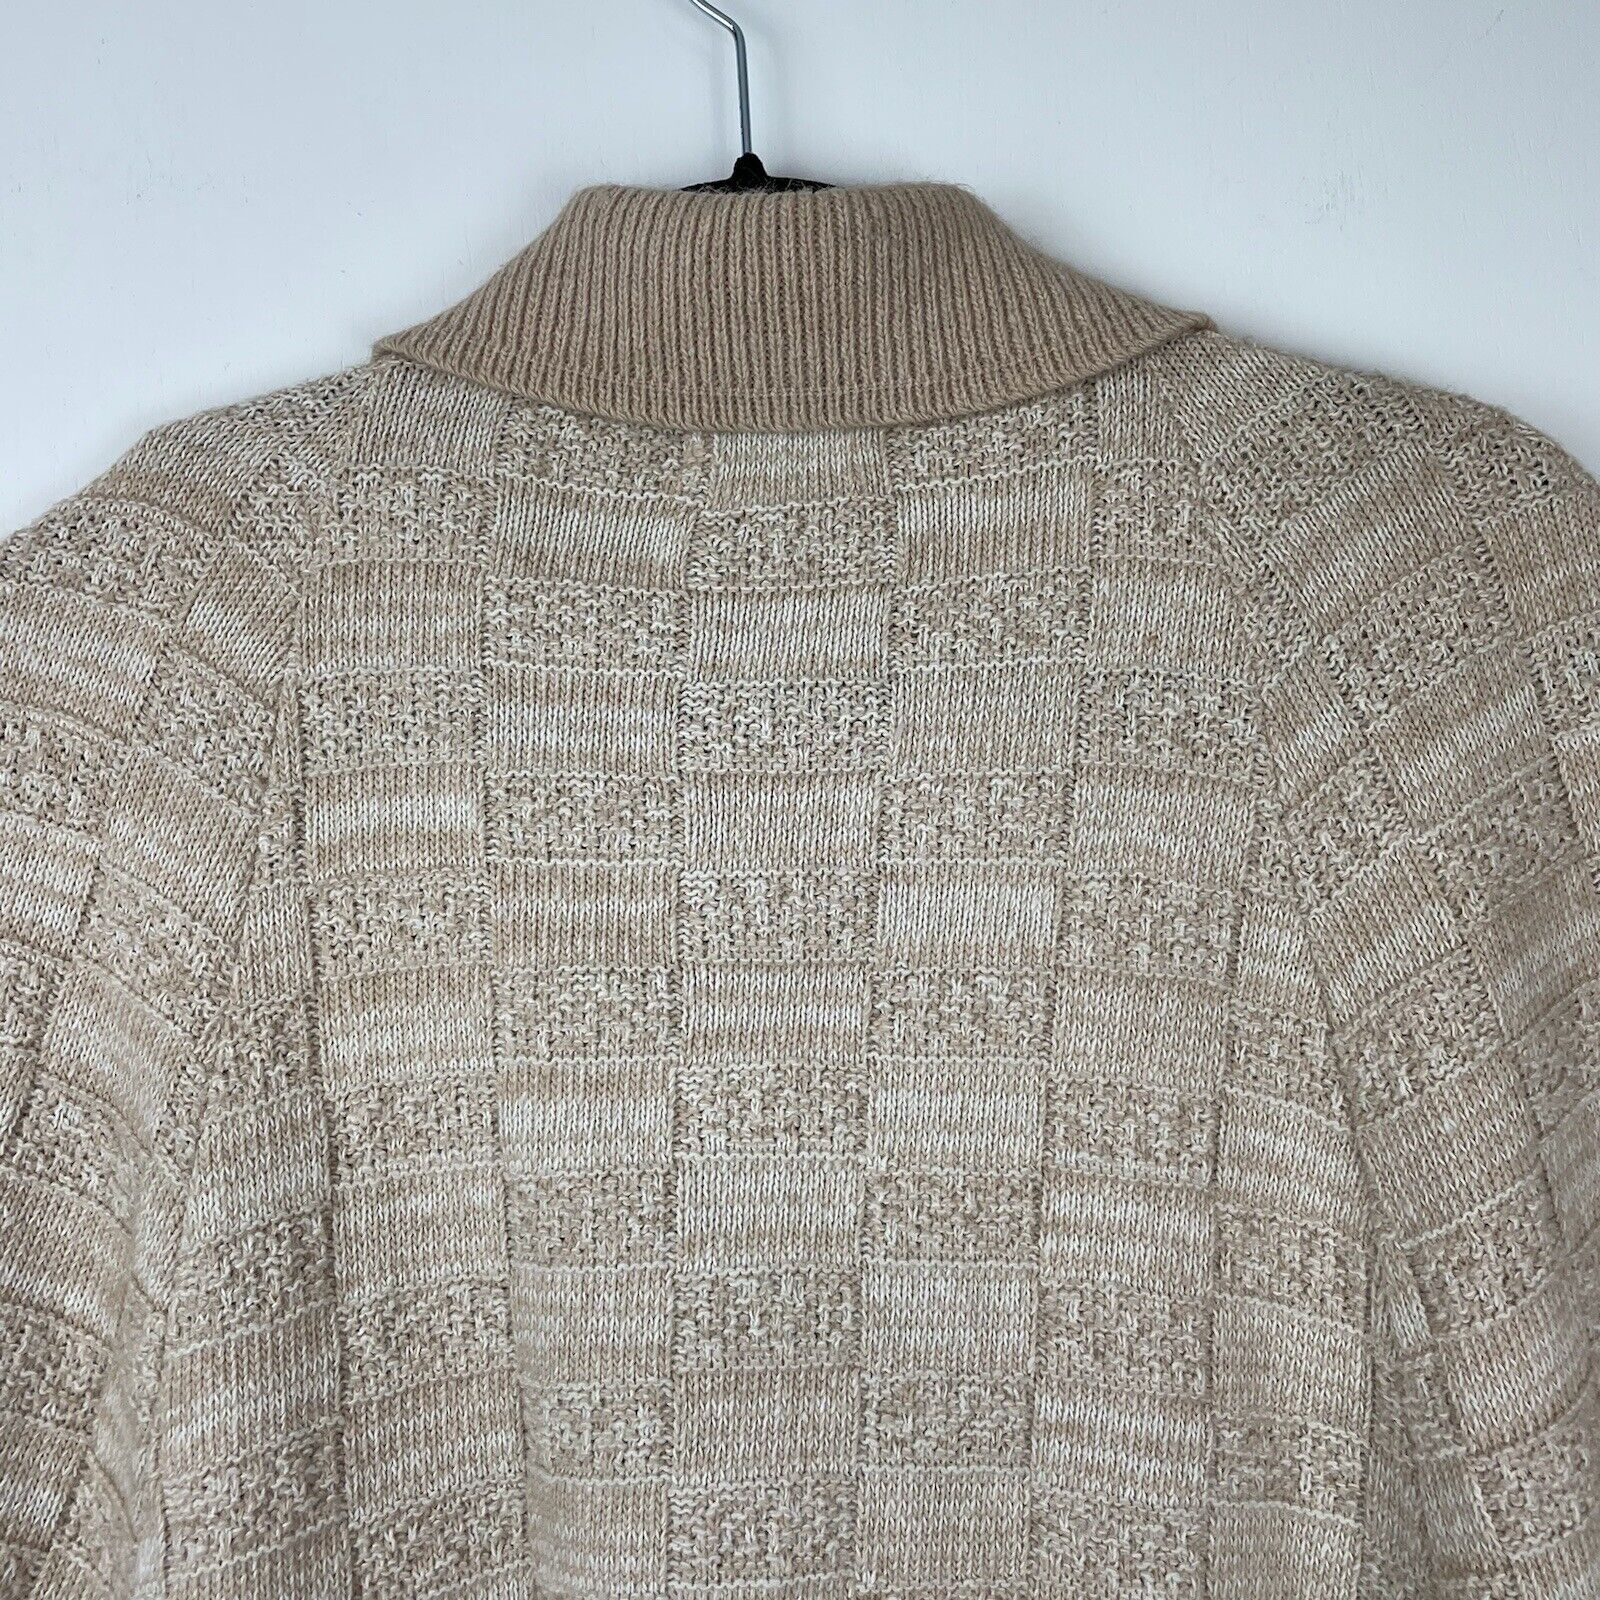 Vintage Sweater Bee by Banff Cape Sweater Poncho … - image 10